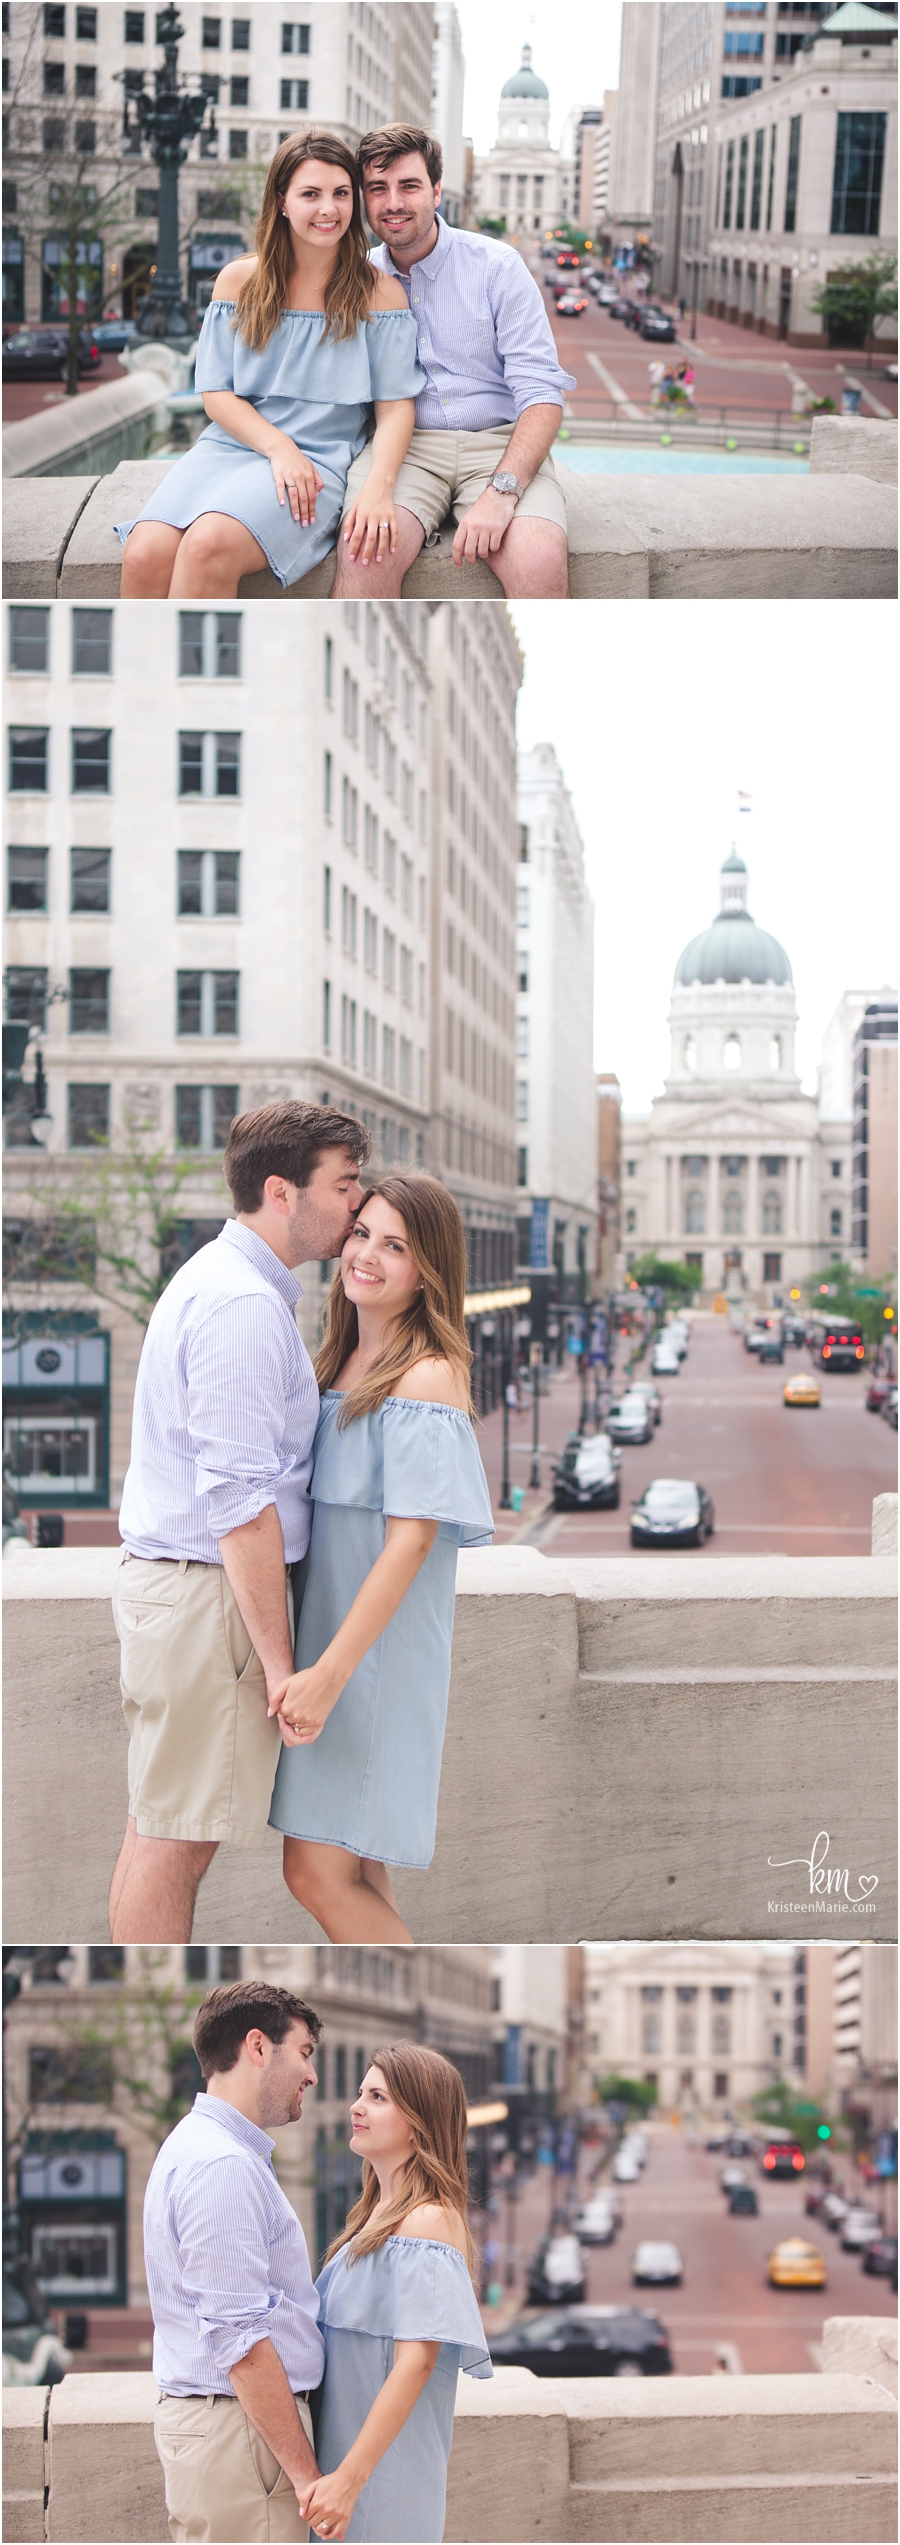 downtown Indianapolis courthouse in background - engagement pictures